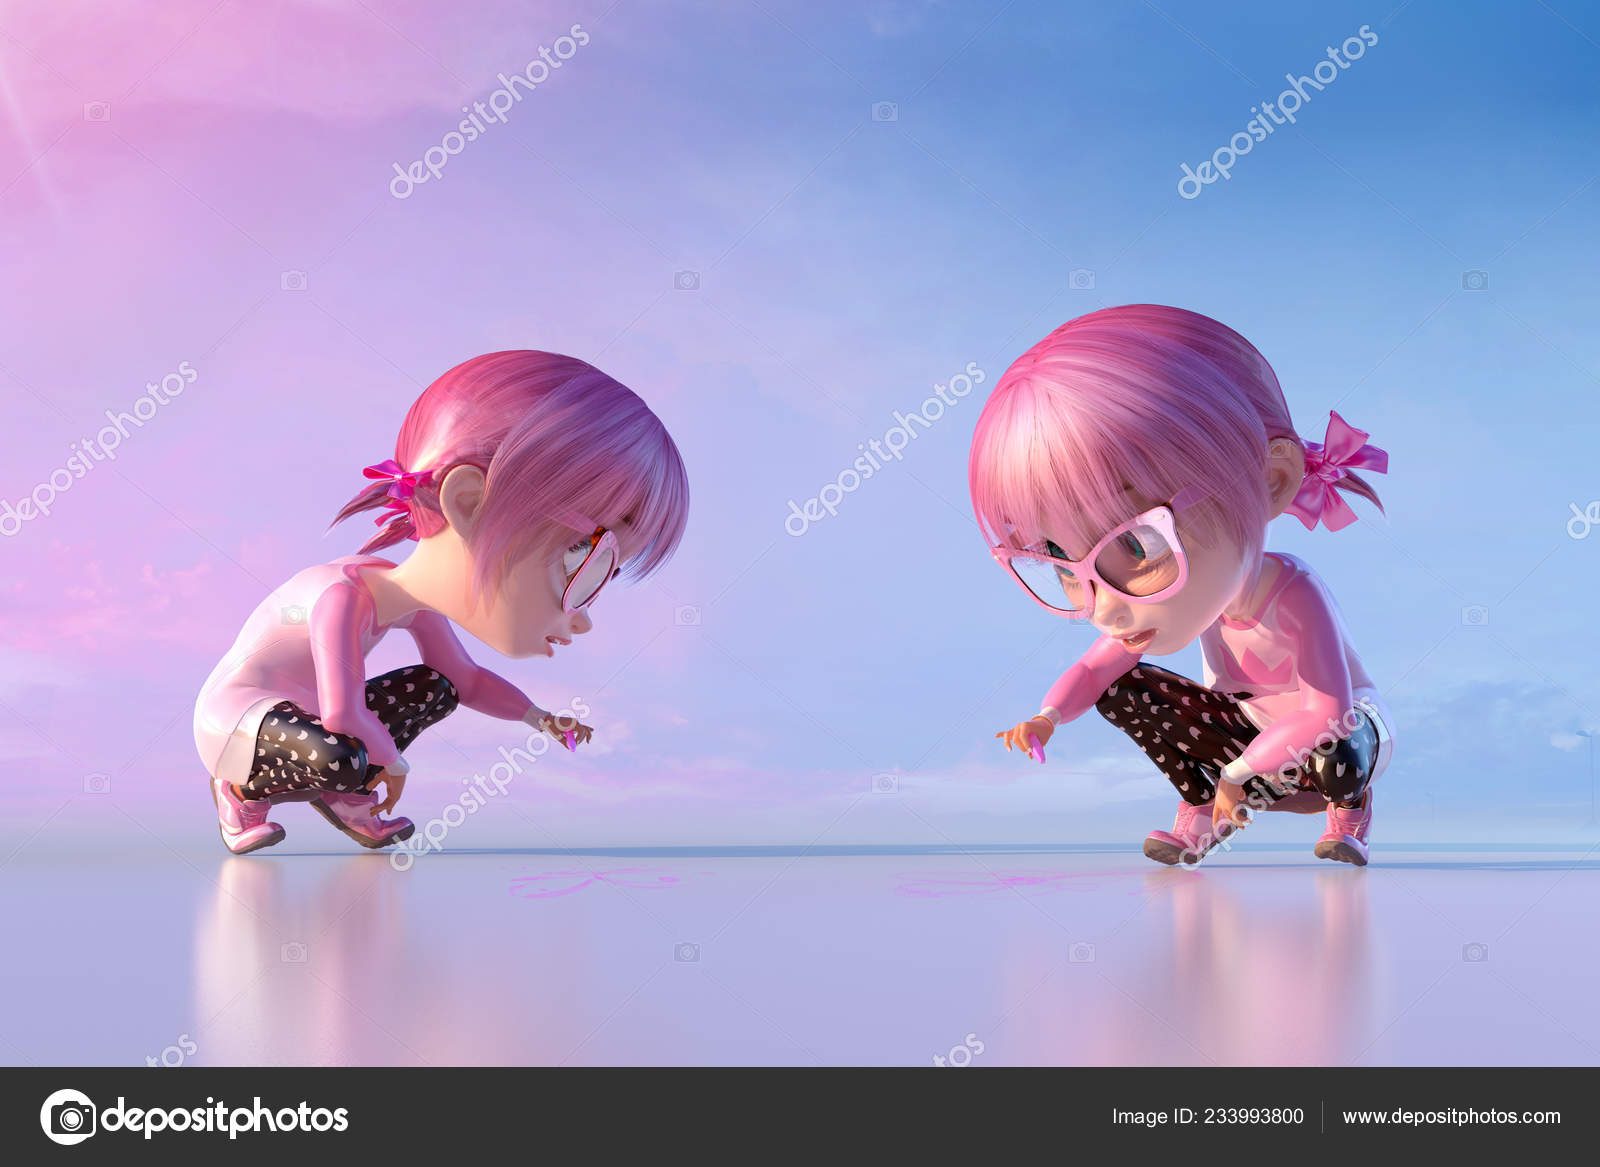 Cute cartoon girl draw with Stock Photo by © 233993800